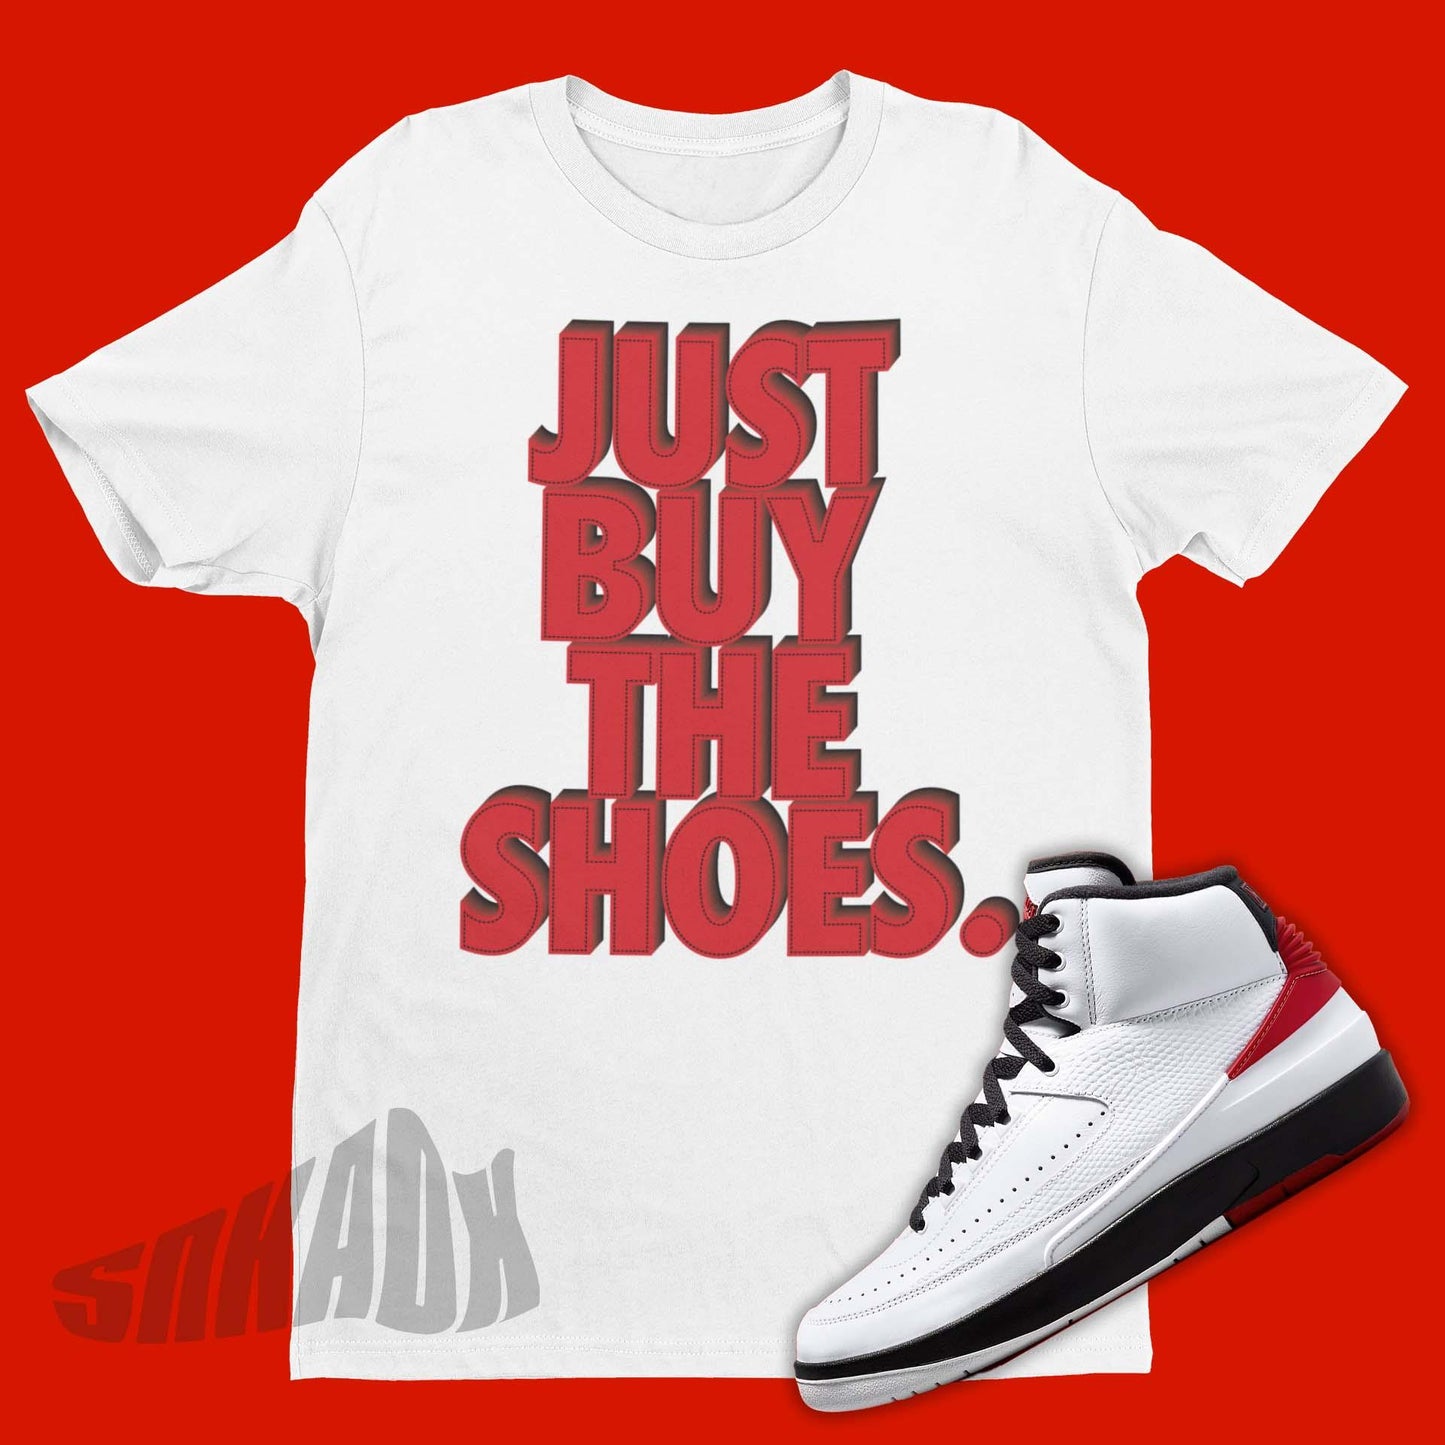 Just Buy The Shoes Shirt To Match Air Jordan 2 OG Chicago